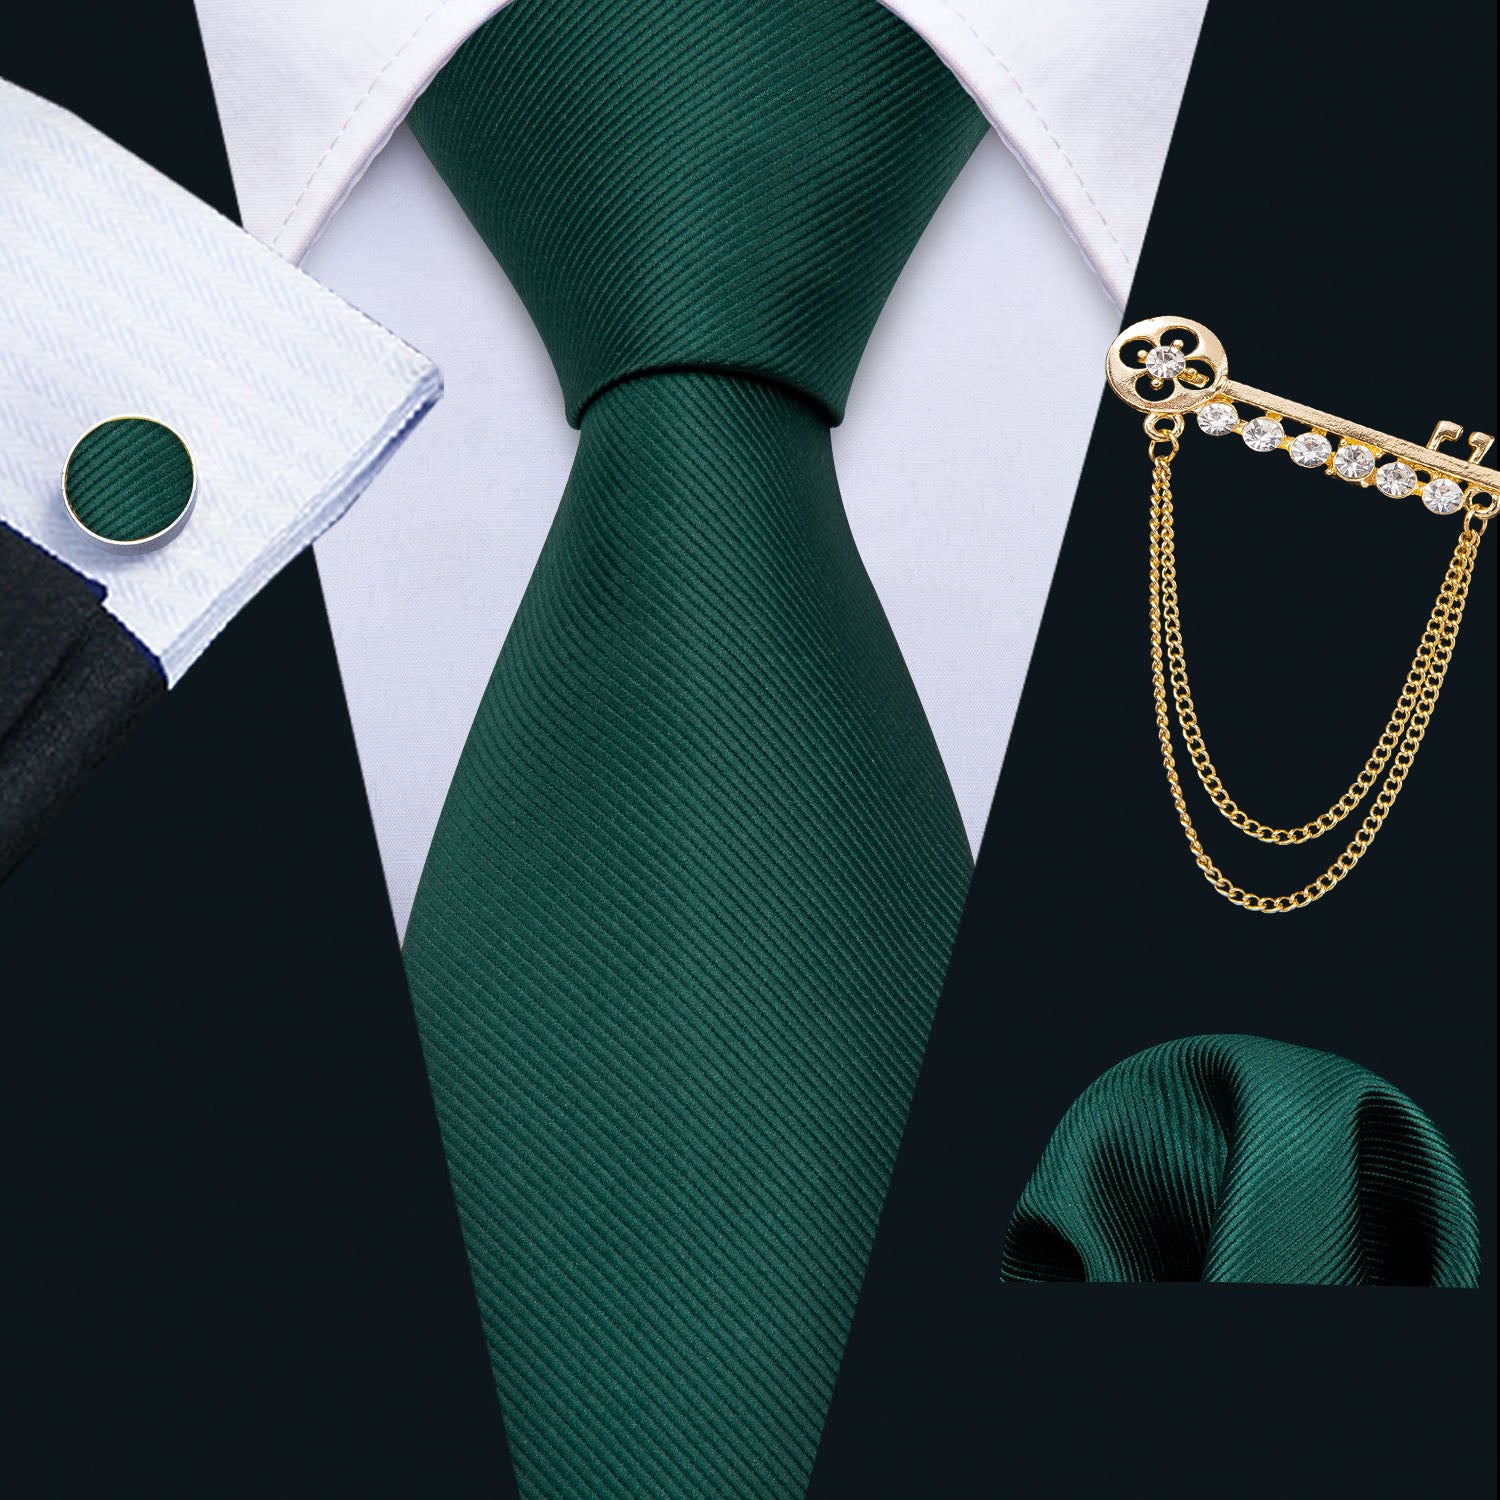 Green Tie Solid Men's Tie Pocket Square Cufflinks with Lapel Pin